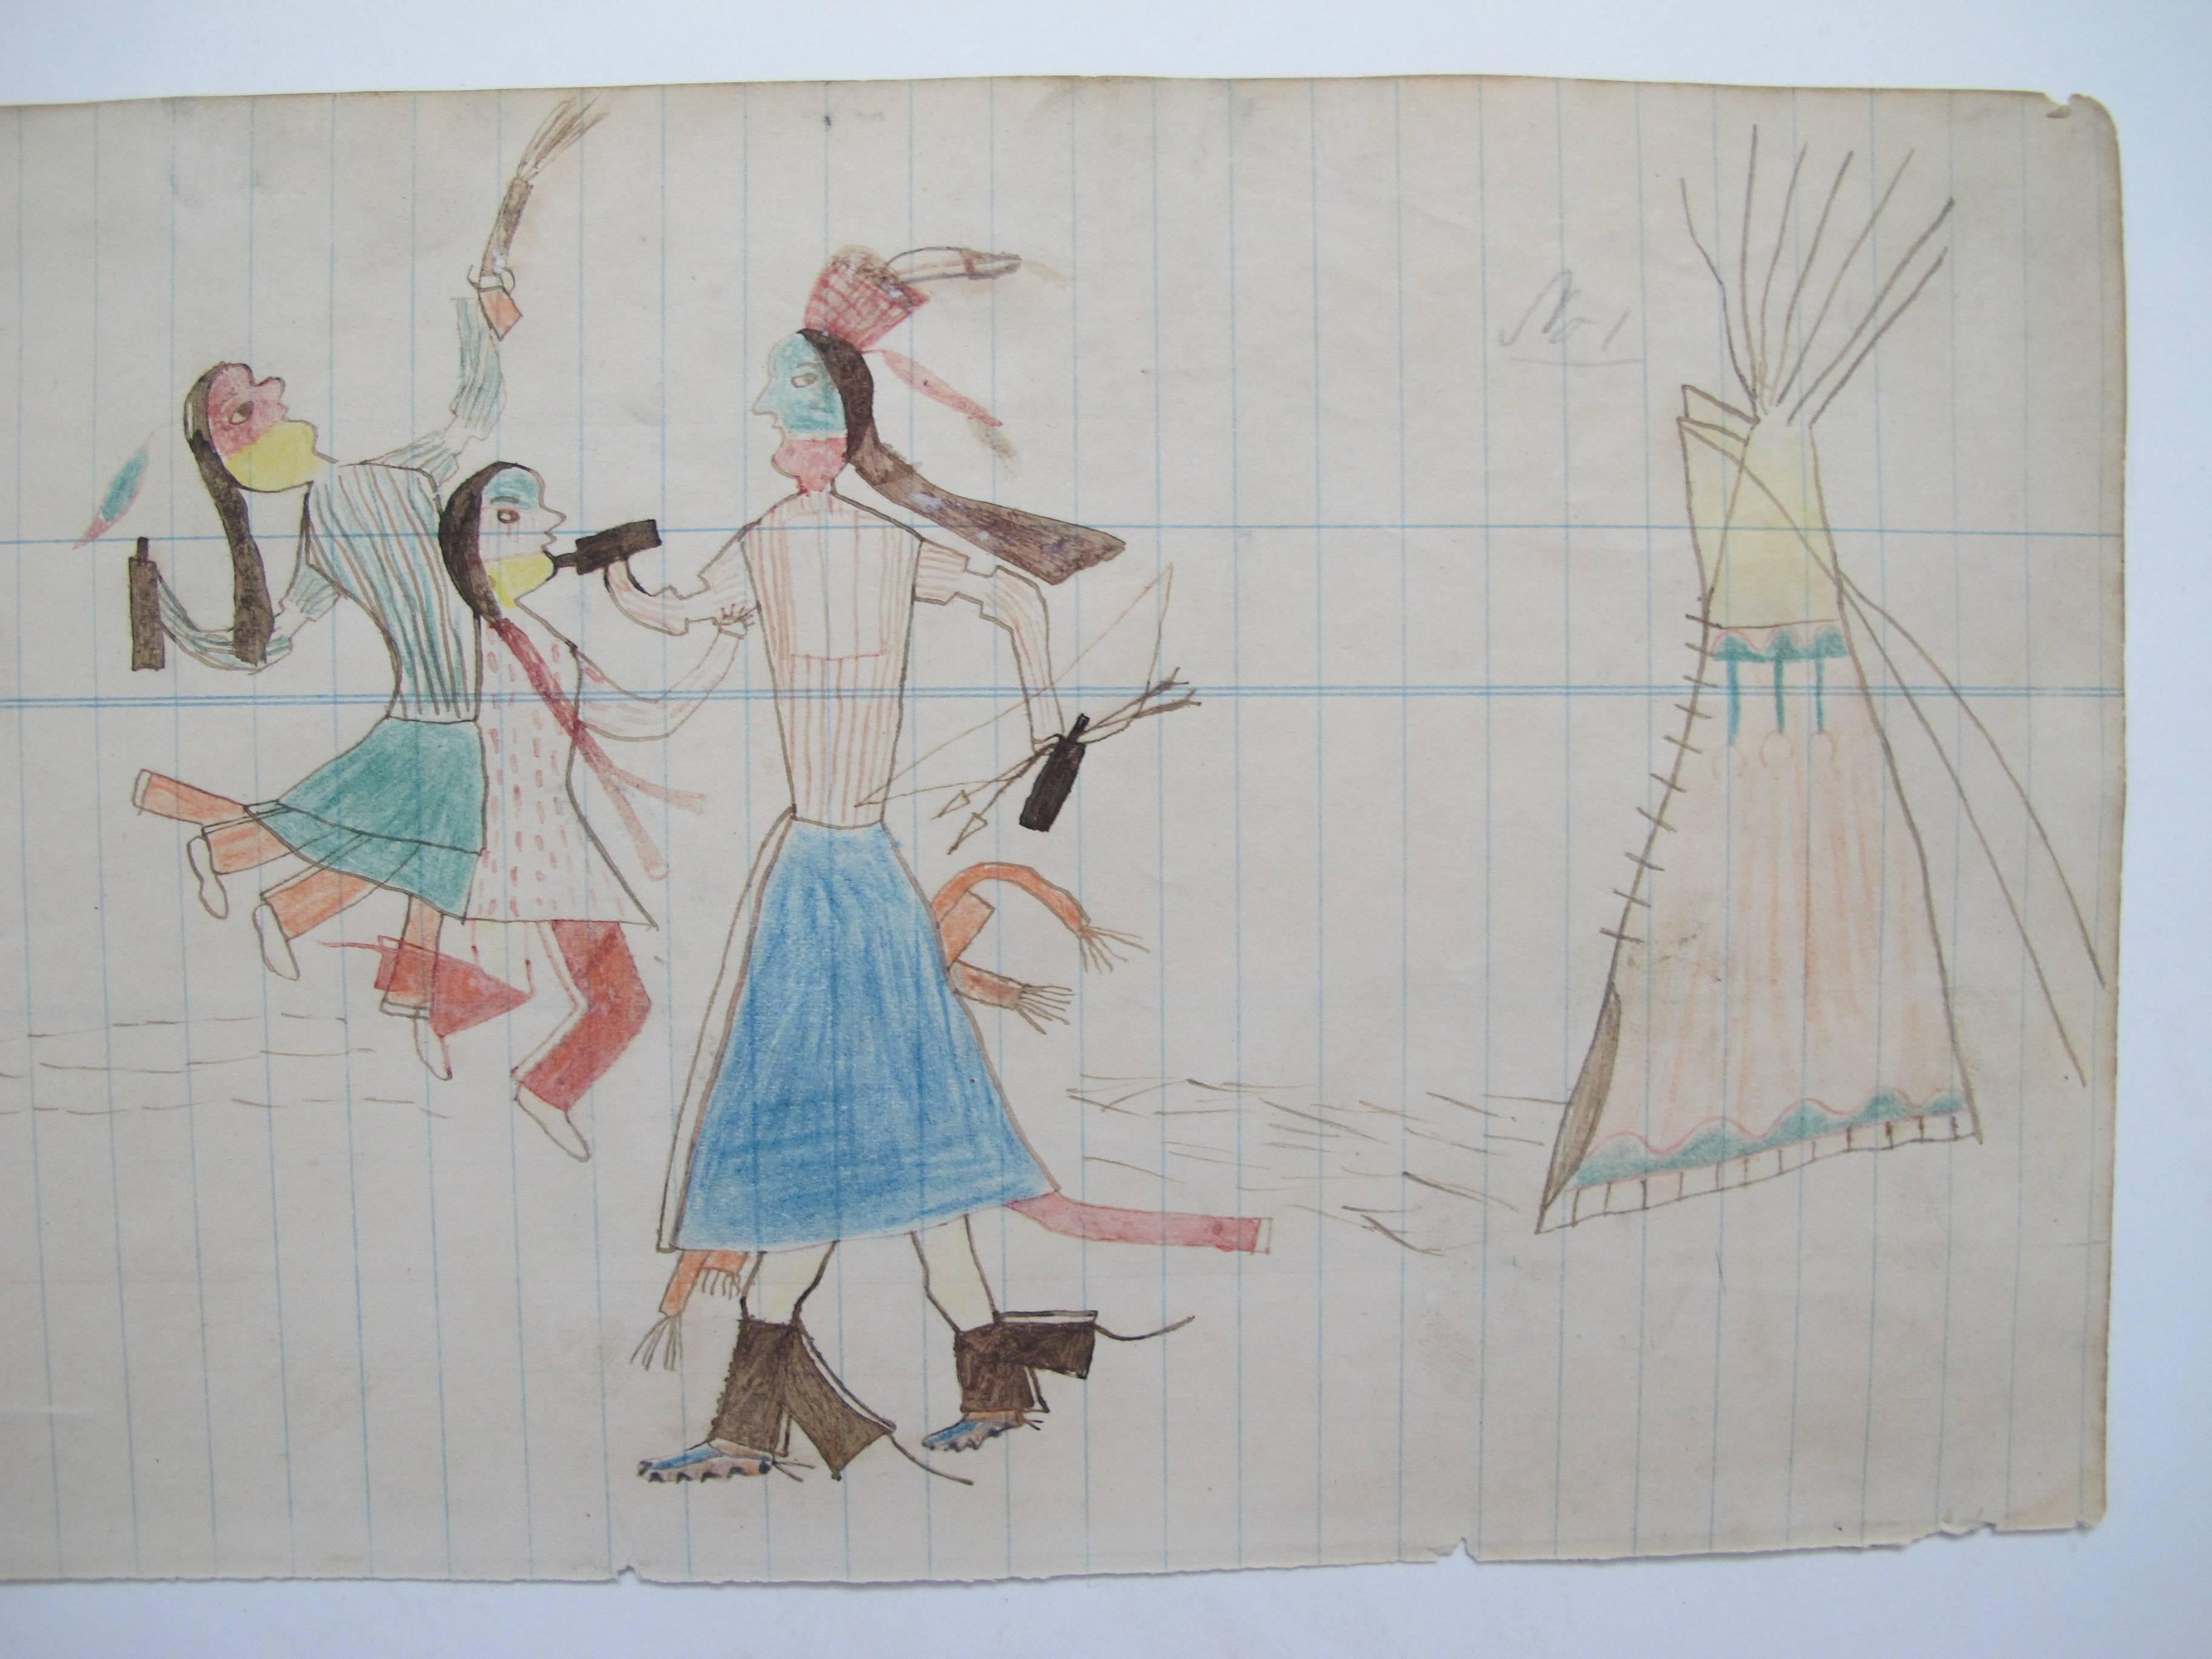 Unusual ledger drawing with three Indians drinking and one firing in the air. The Indians with face paint are animated between two tipis holding black bottles. Picture not framed.
From a private collection and originally purchased from Pace Gallery